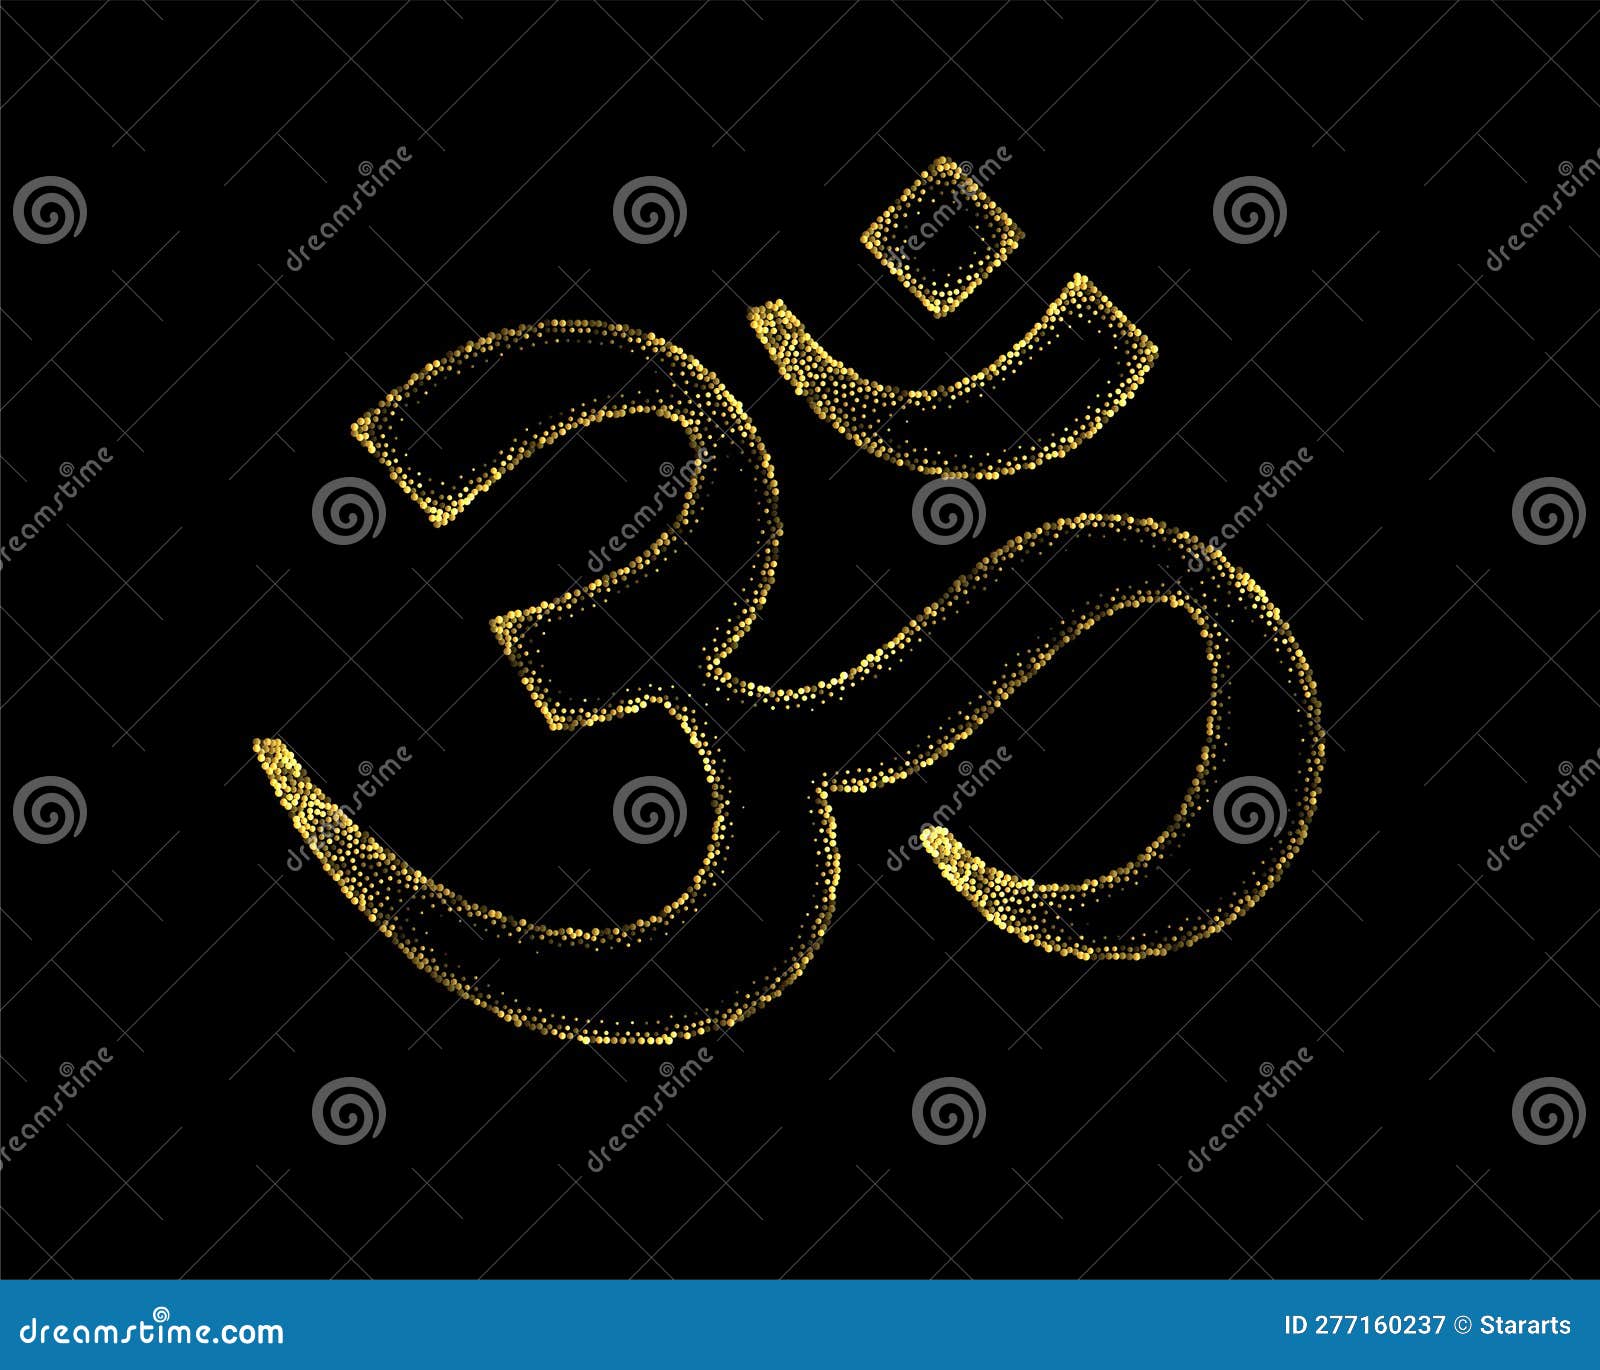 the iconic hindu religious om  from vedas and geeta